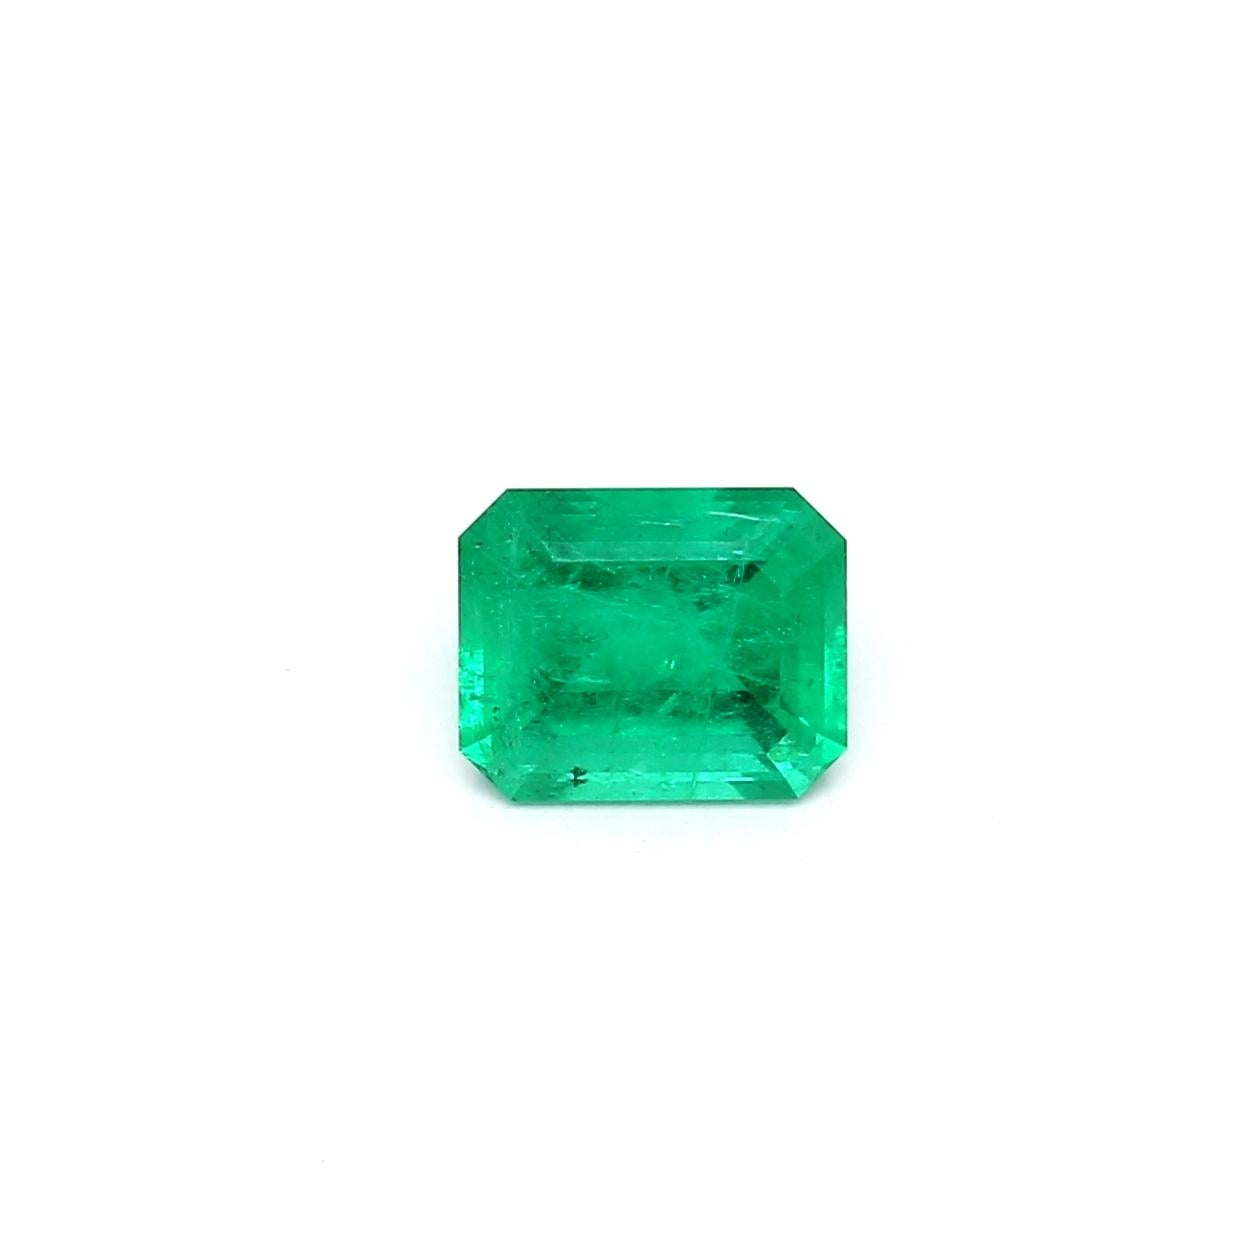 An amazing Russian Emerald which allows jewelers to create a unique piece of wearable art.
This exceptional quality gemstone would make a custom-made jewelry design. Perfect for a Ring or Pendant.

Shape - Octagon
Weight - 1.03 ct
Treatment -